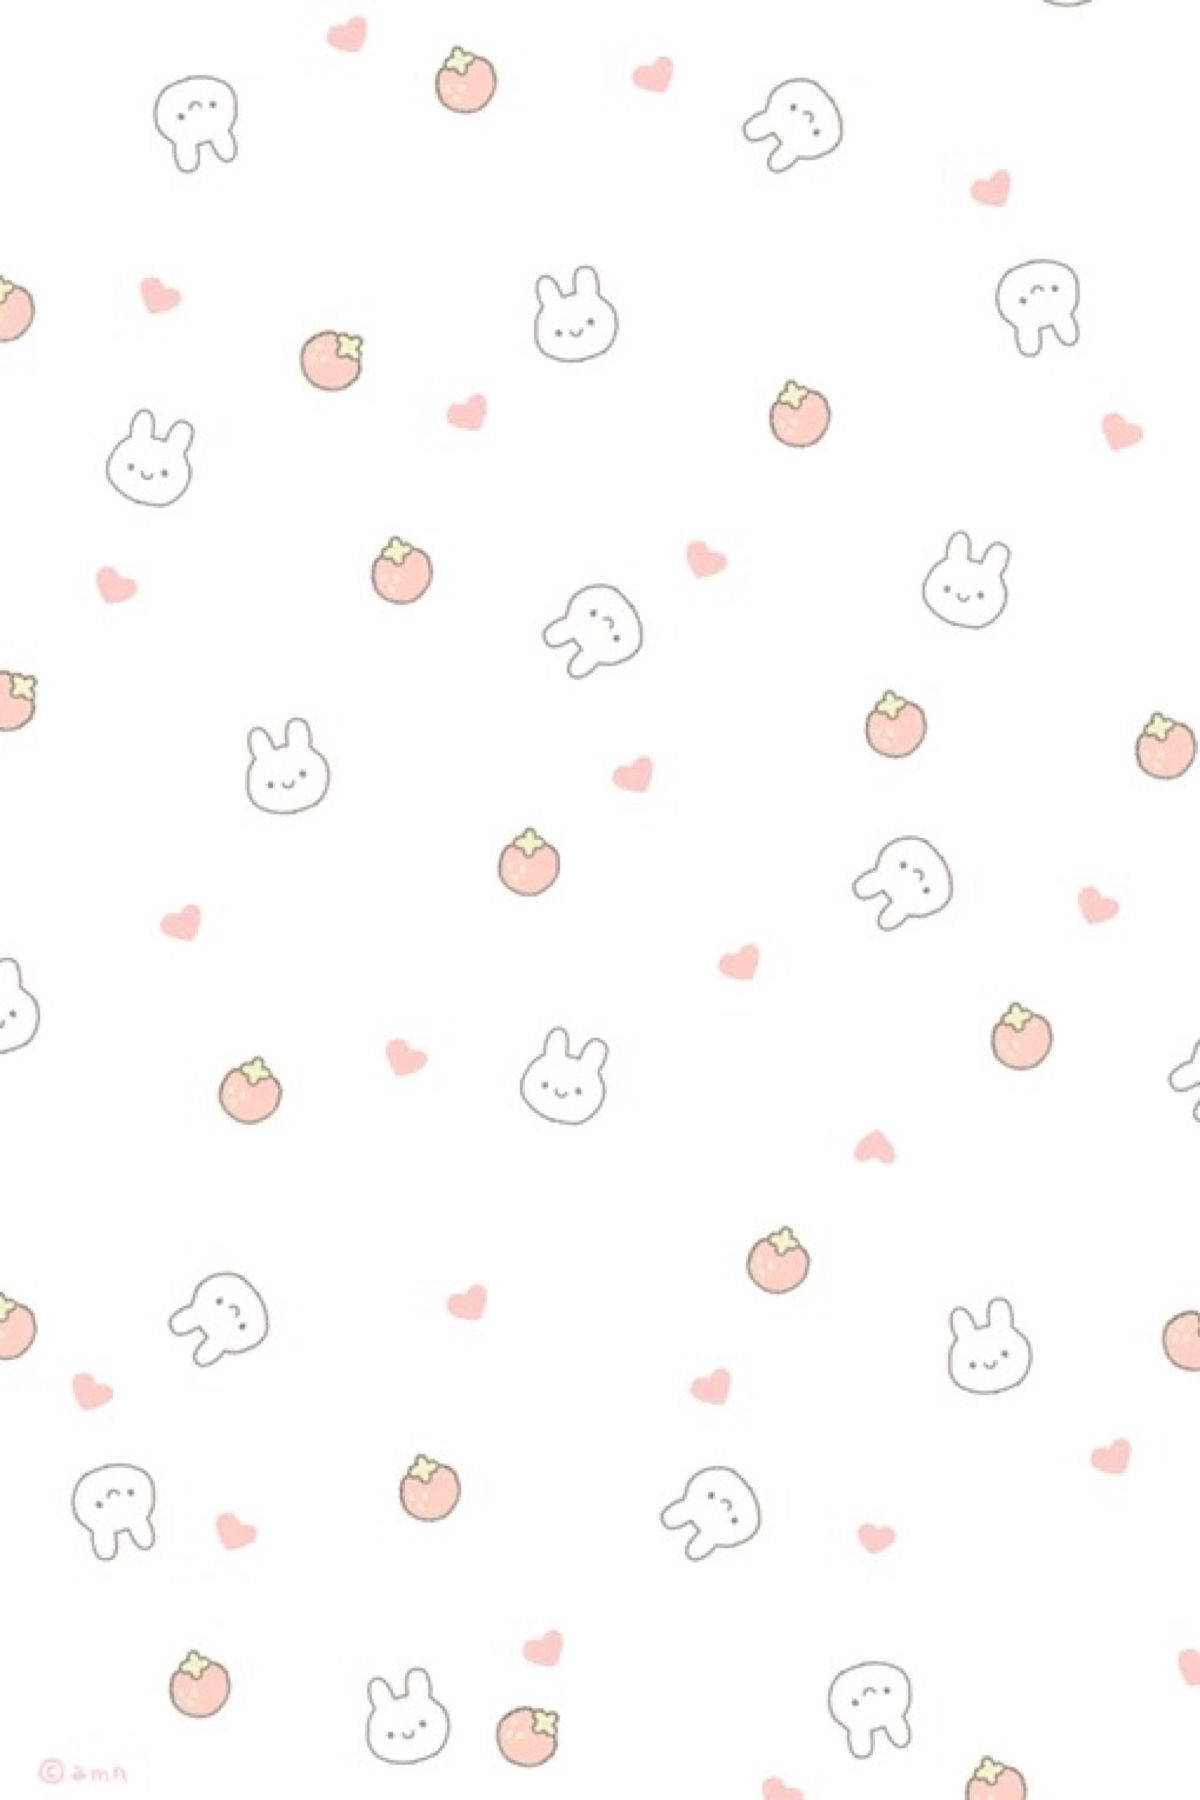 Cute rabbits and strawberries pattern wallpaper.